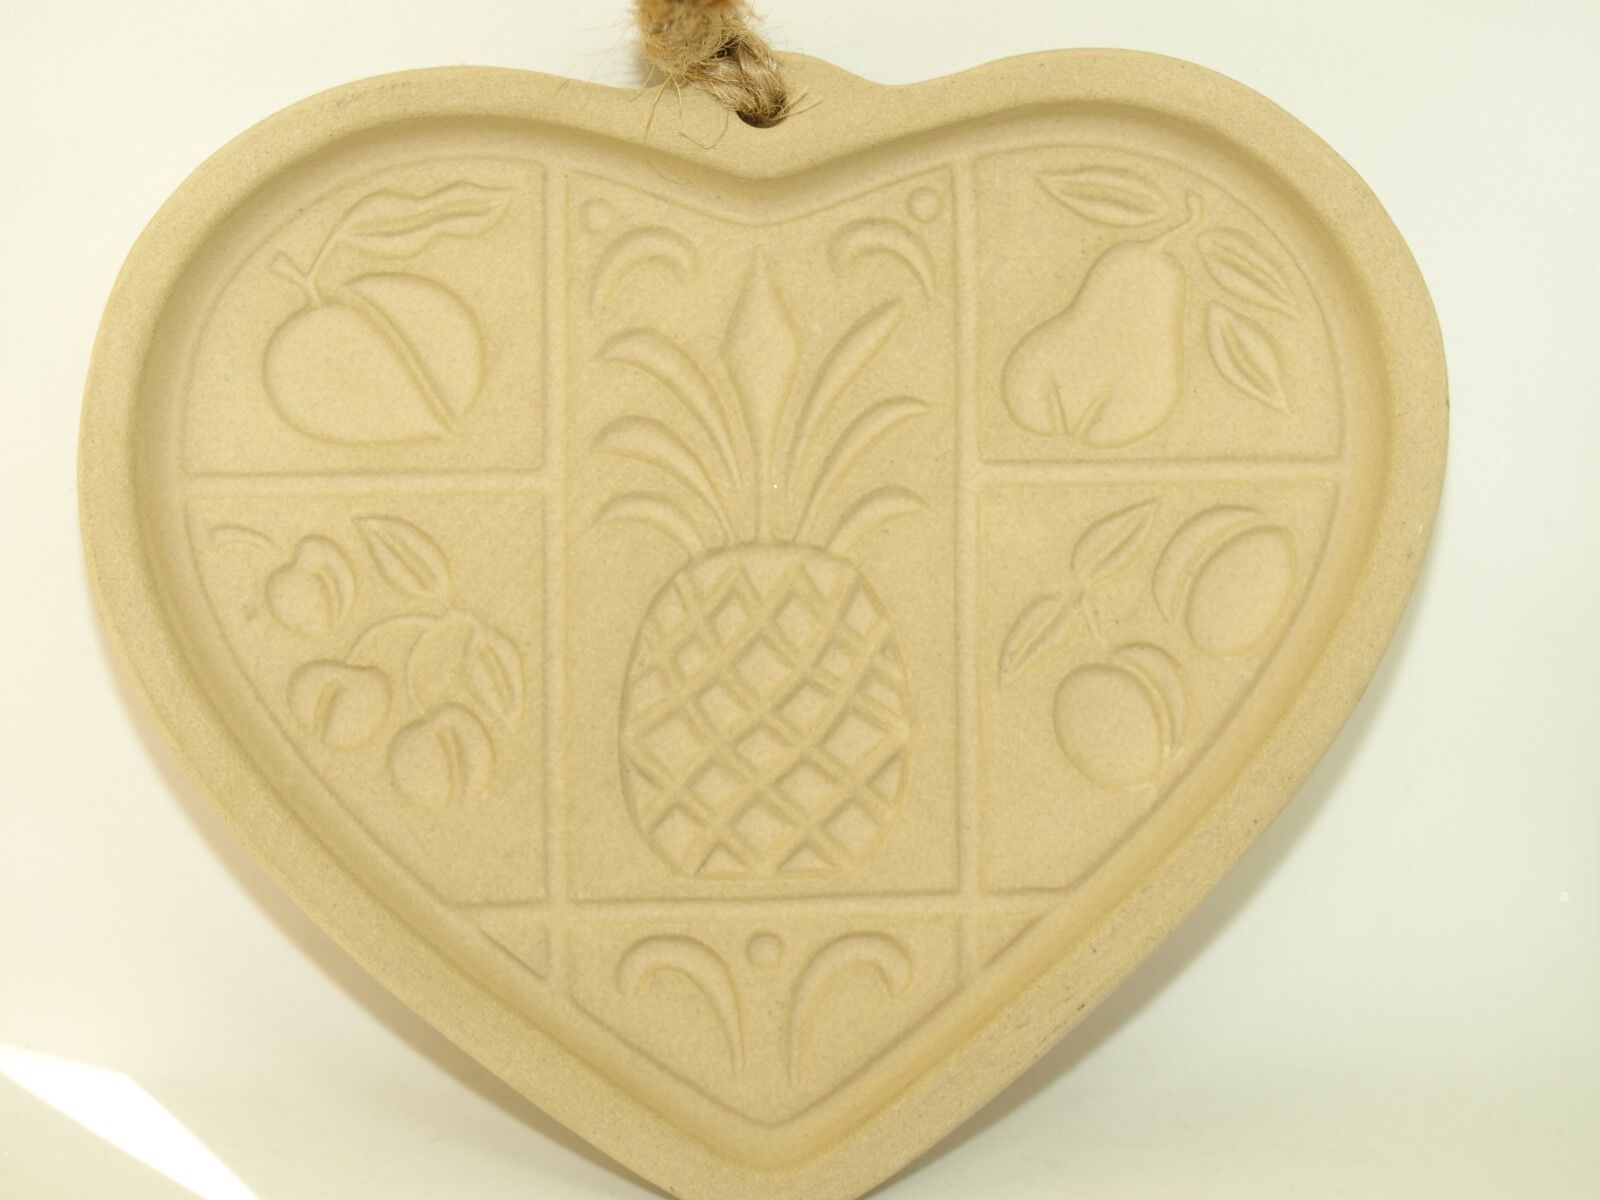 Pampered Chef 2001 Hospitality Heart Stoneware Cookie Mold Fruit Design